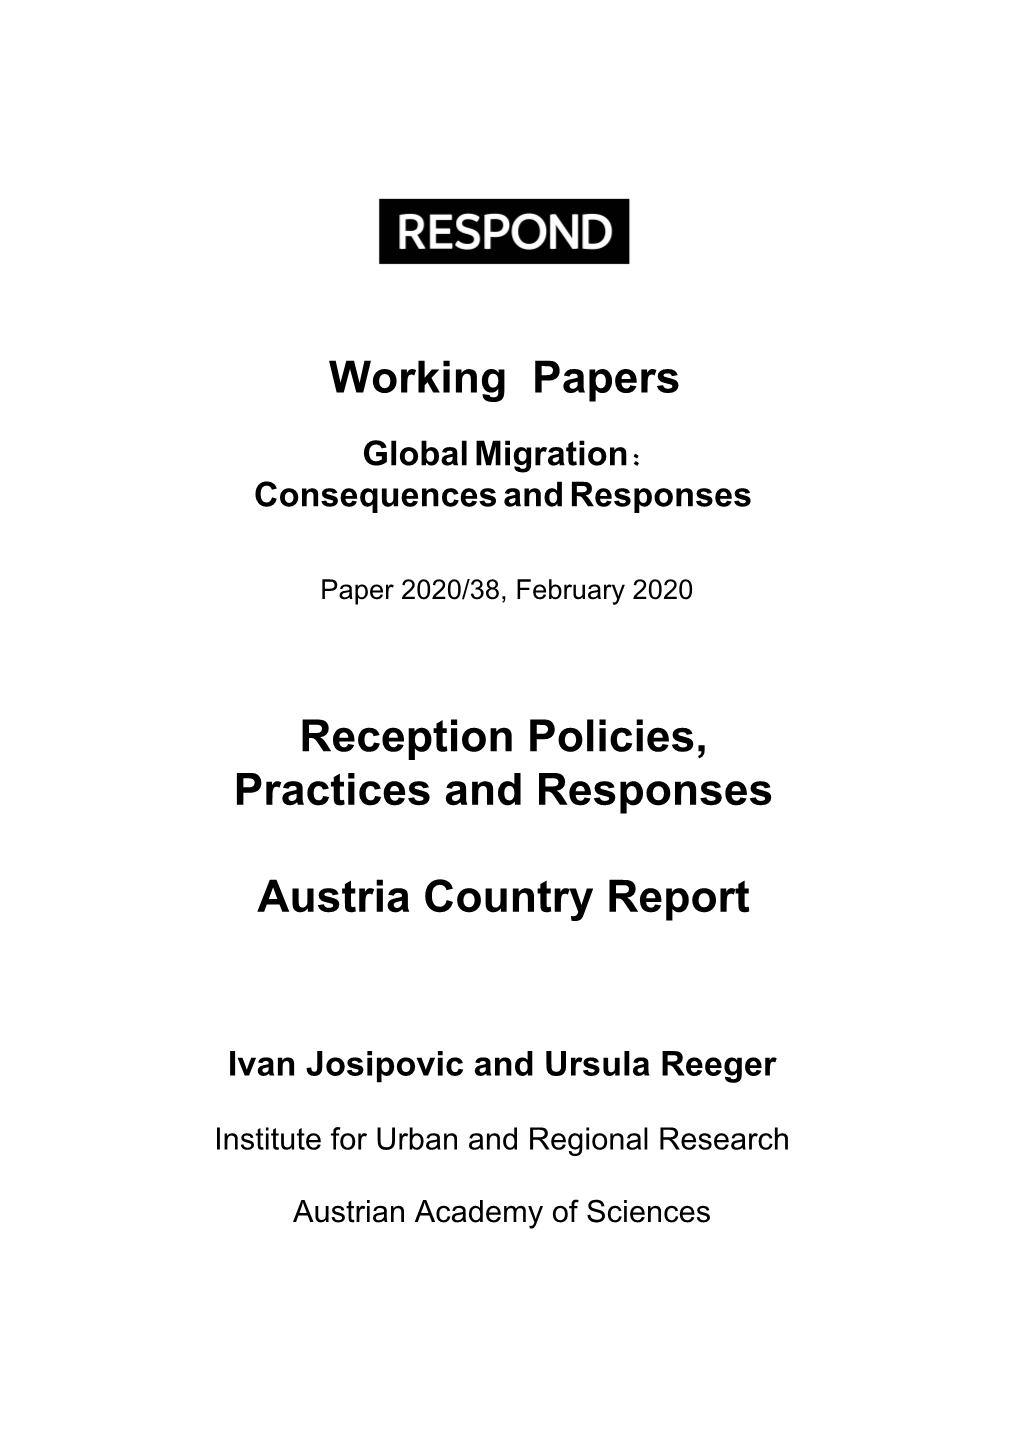 Reception Policies, Practices and Responses Austria Country Report